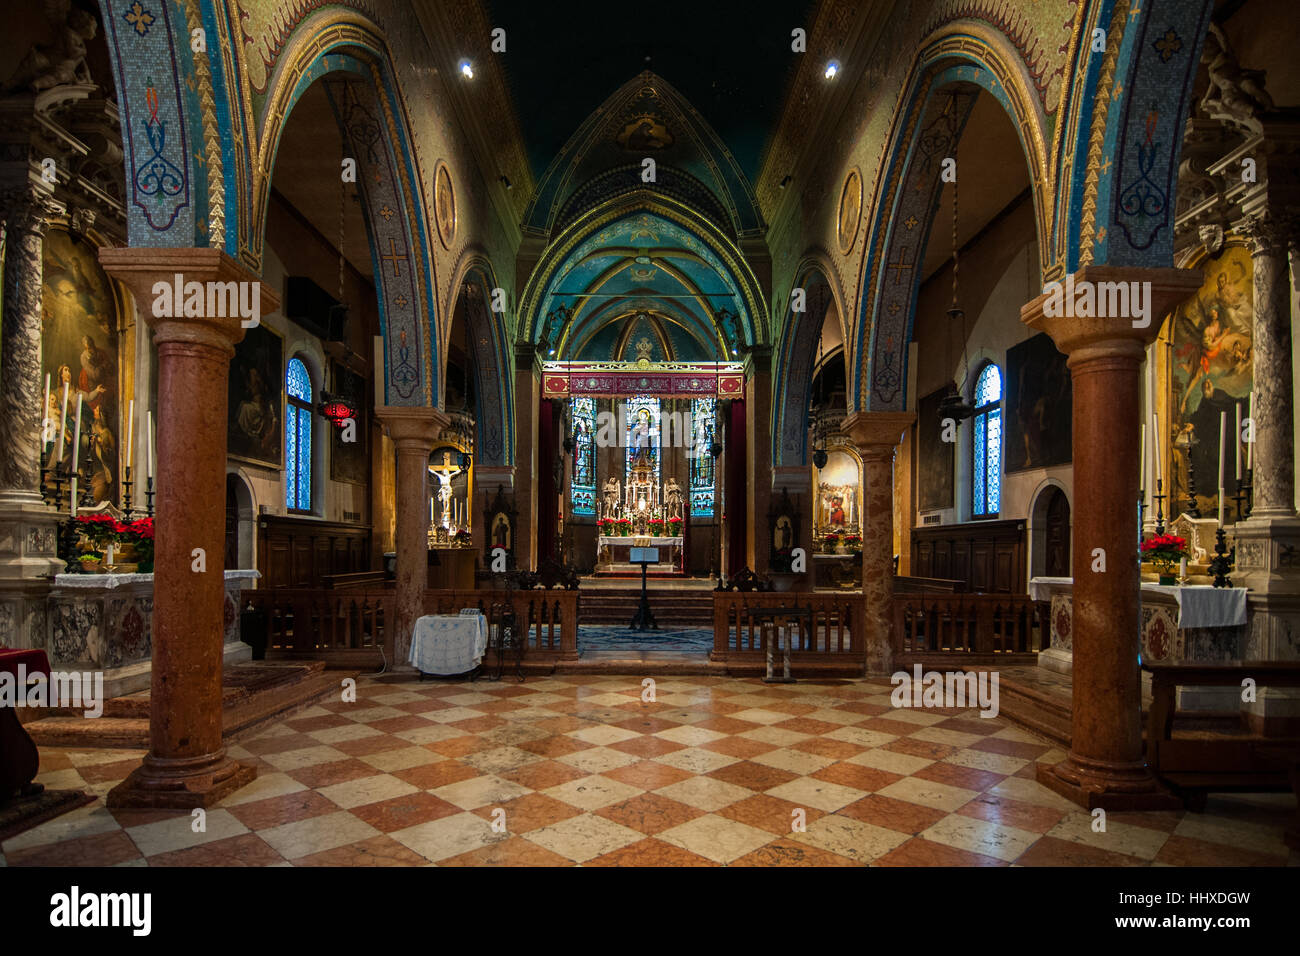 The inside of the monastery at 'San Lazzaro of Armeni' island in Venice,that host one of the first centers in the world of Armenian culture. Stock Photo